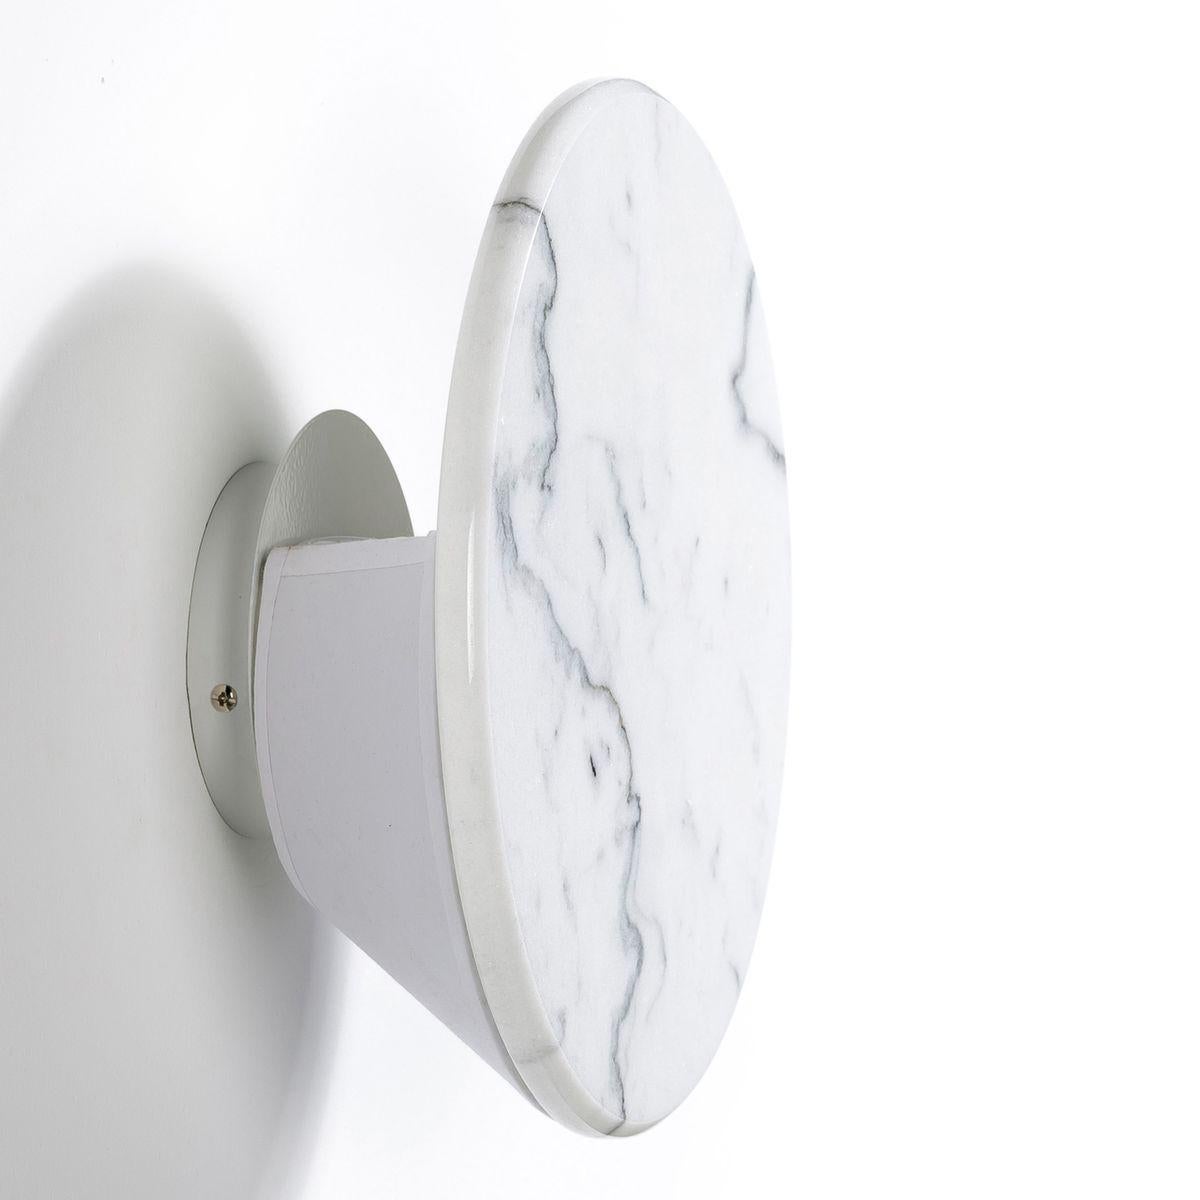 Round white marble wall light elegant, presence and class all in transparency, like a moon. New item, never used.